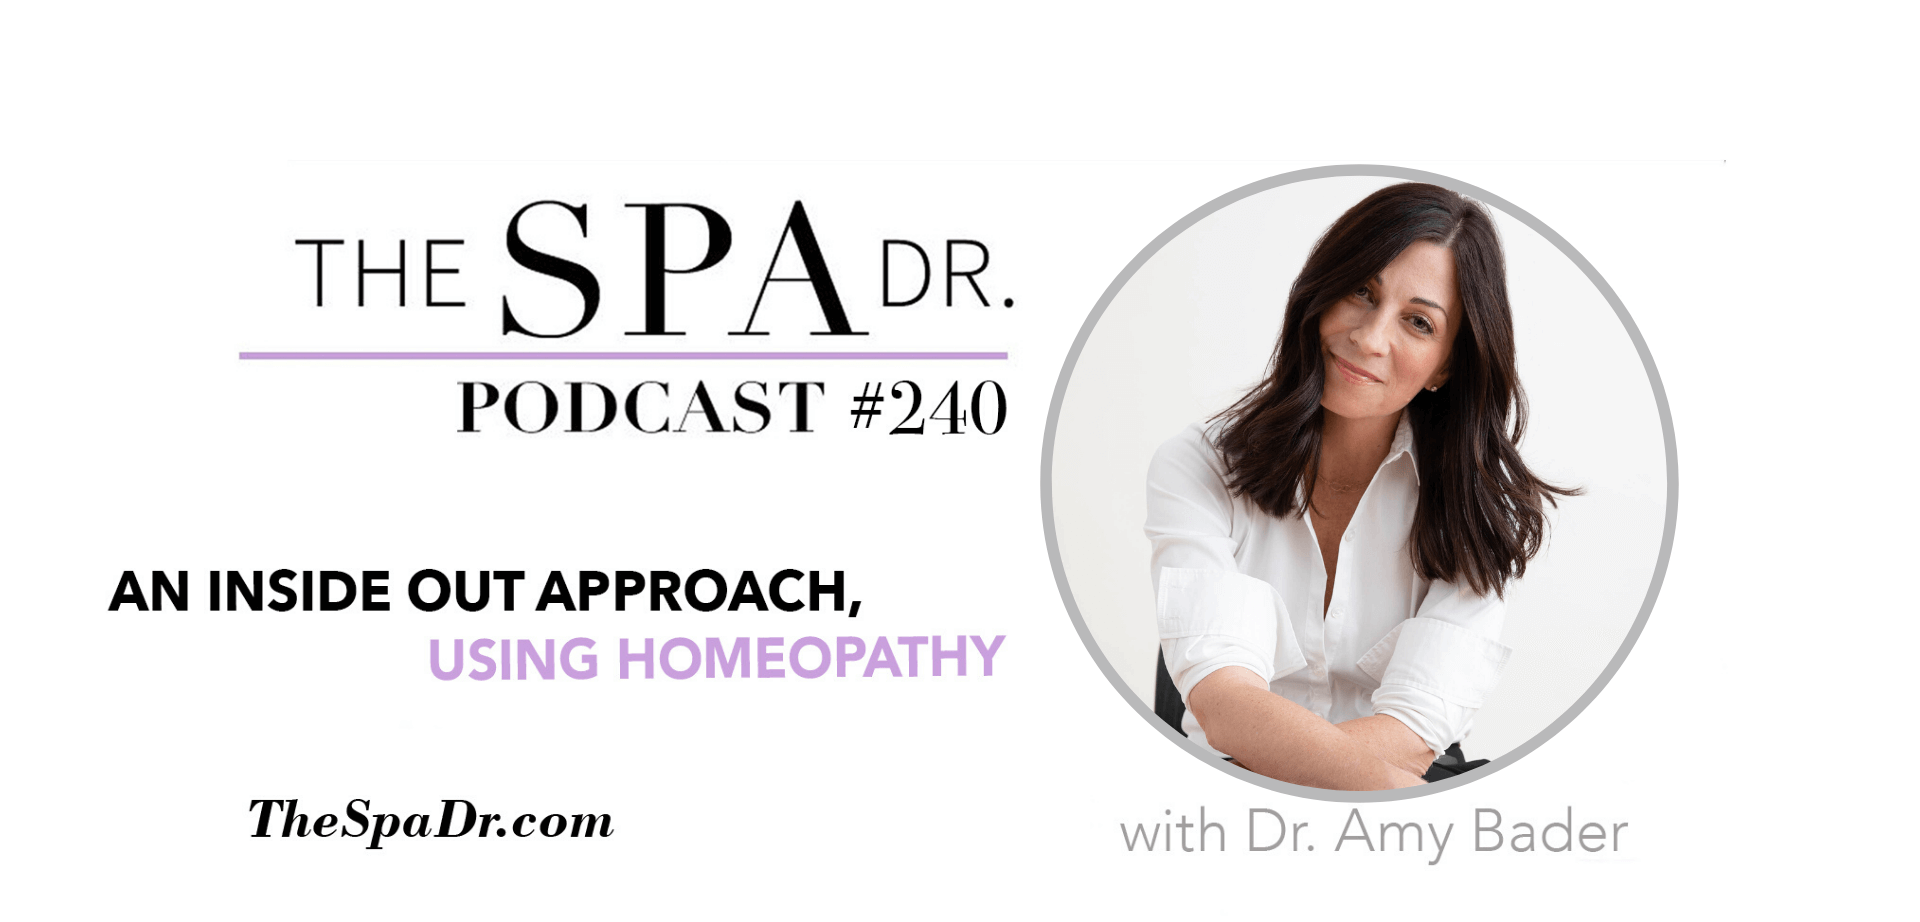 An inside out approach, using Homeopathy With Dr. Amy Bader